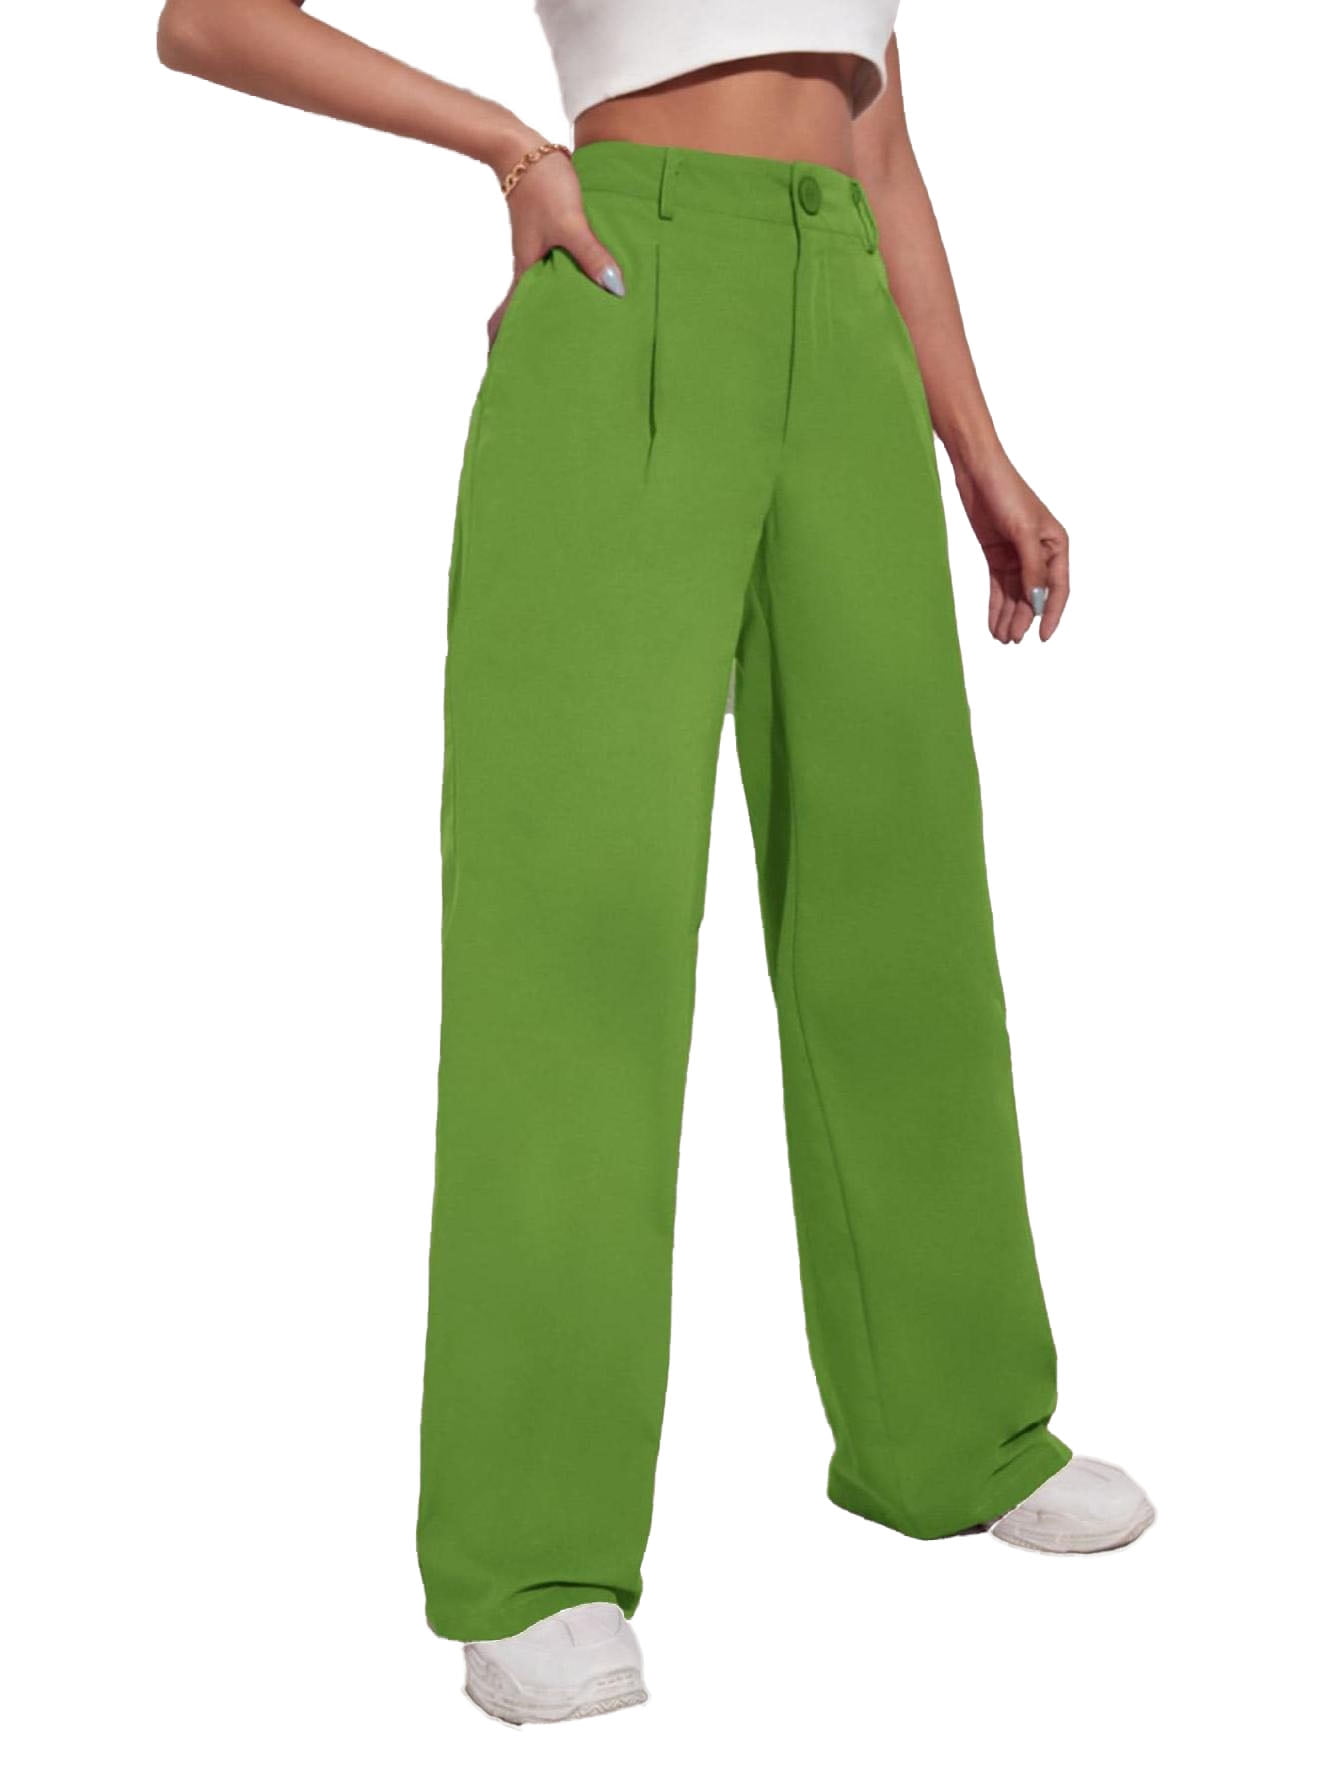 Issey Miyake A-POC lime green pants — Flower in the Mirror Vintage